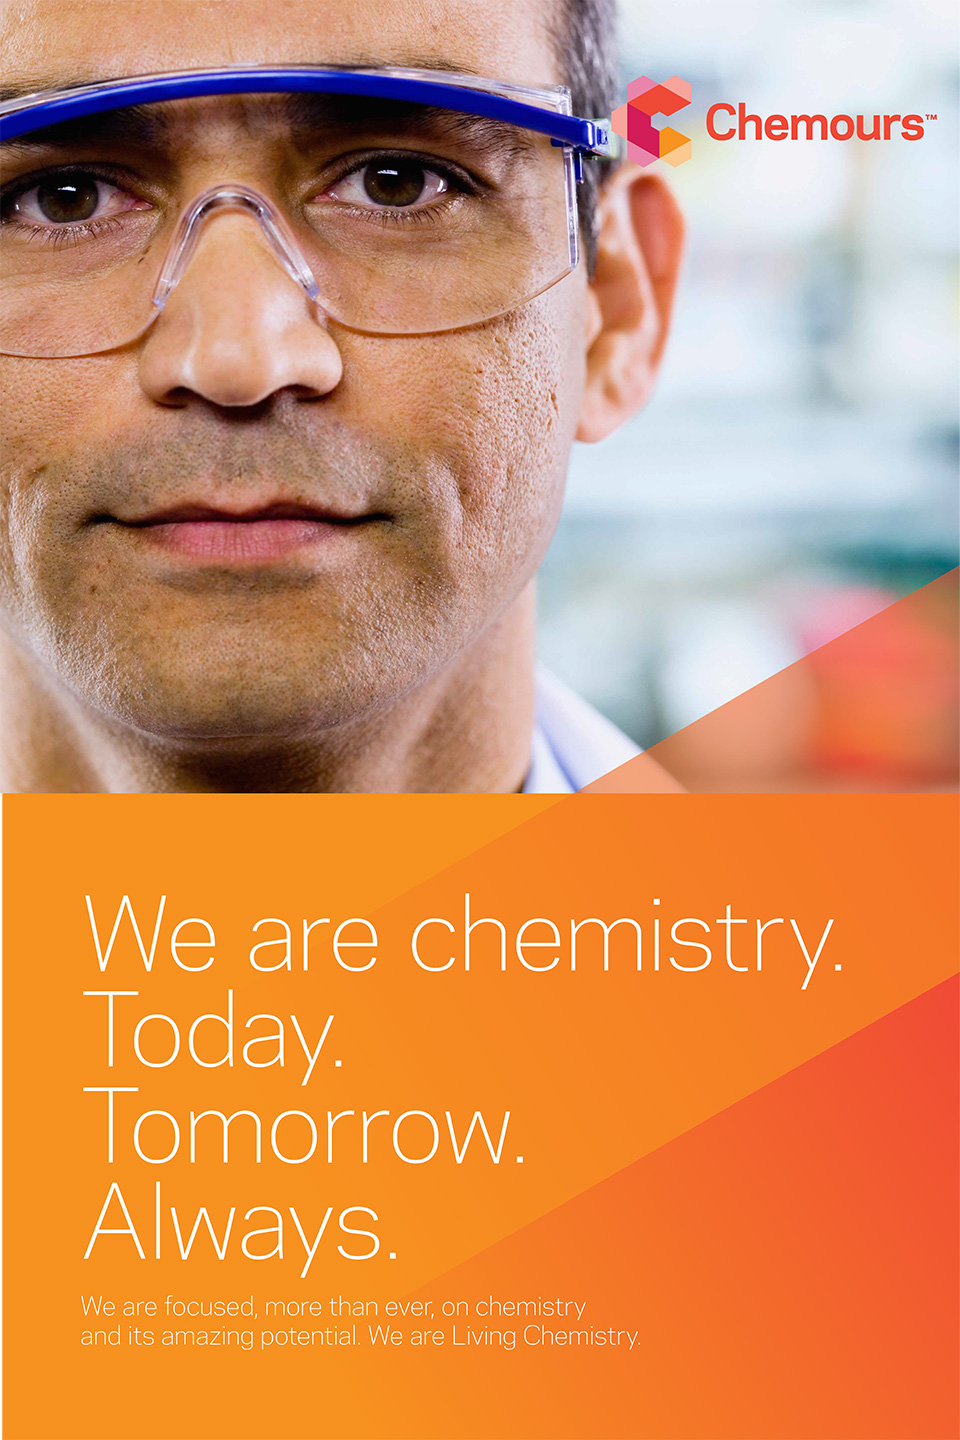 Chemours_always_poster